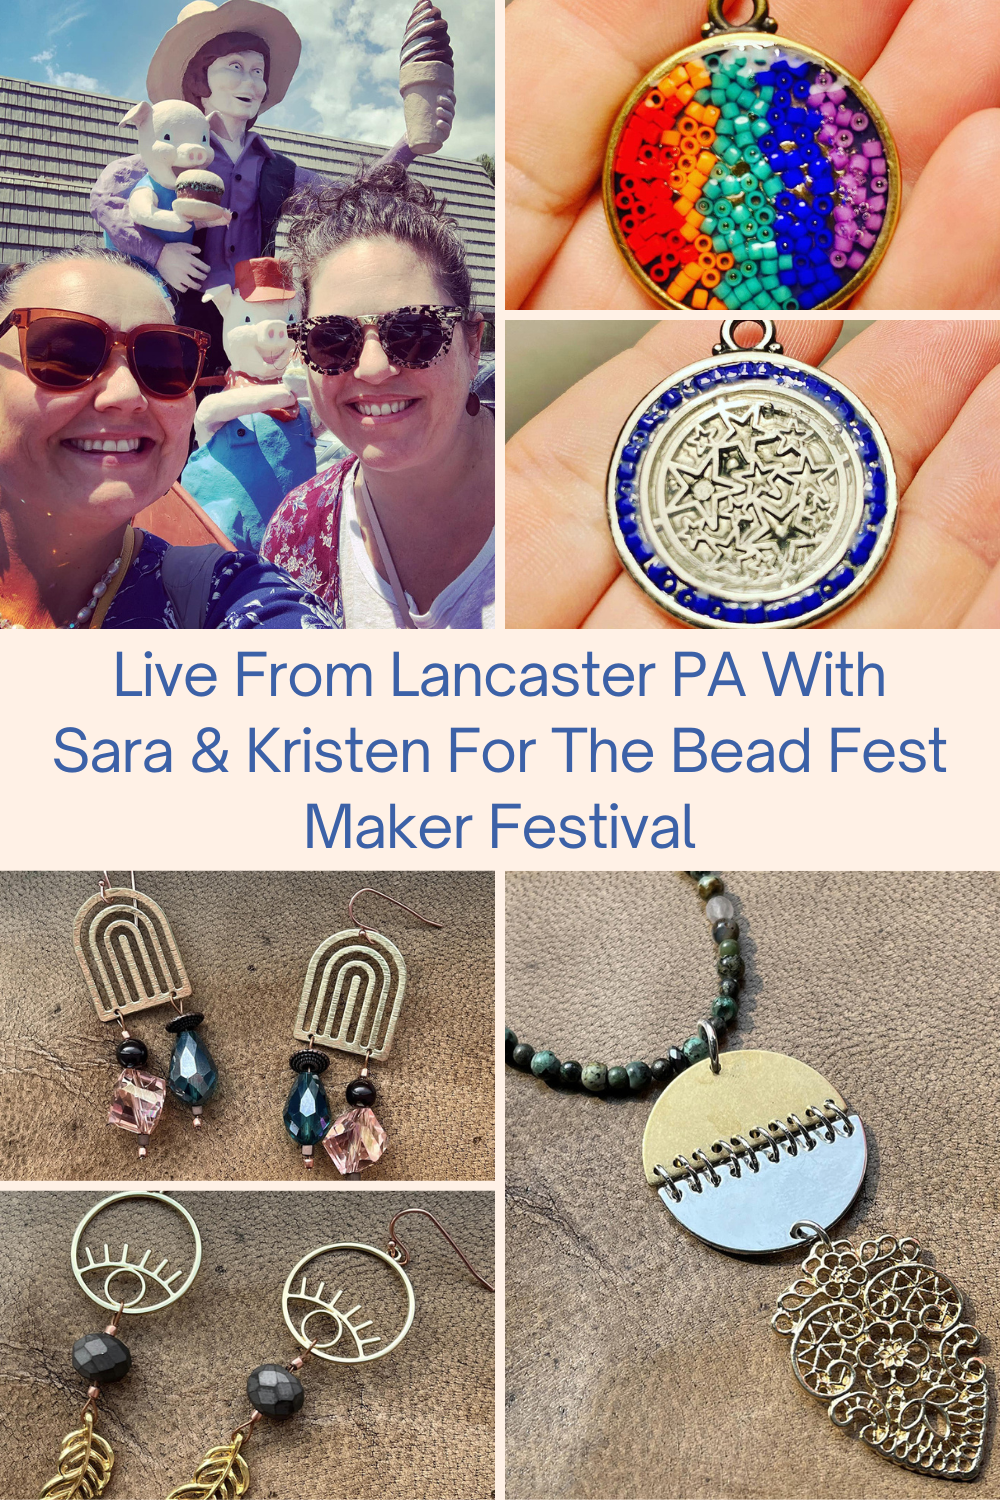 Live From Lancaster PA With Sara & Kristen For The Bead Fest Maker Festival Collage